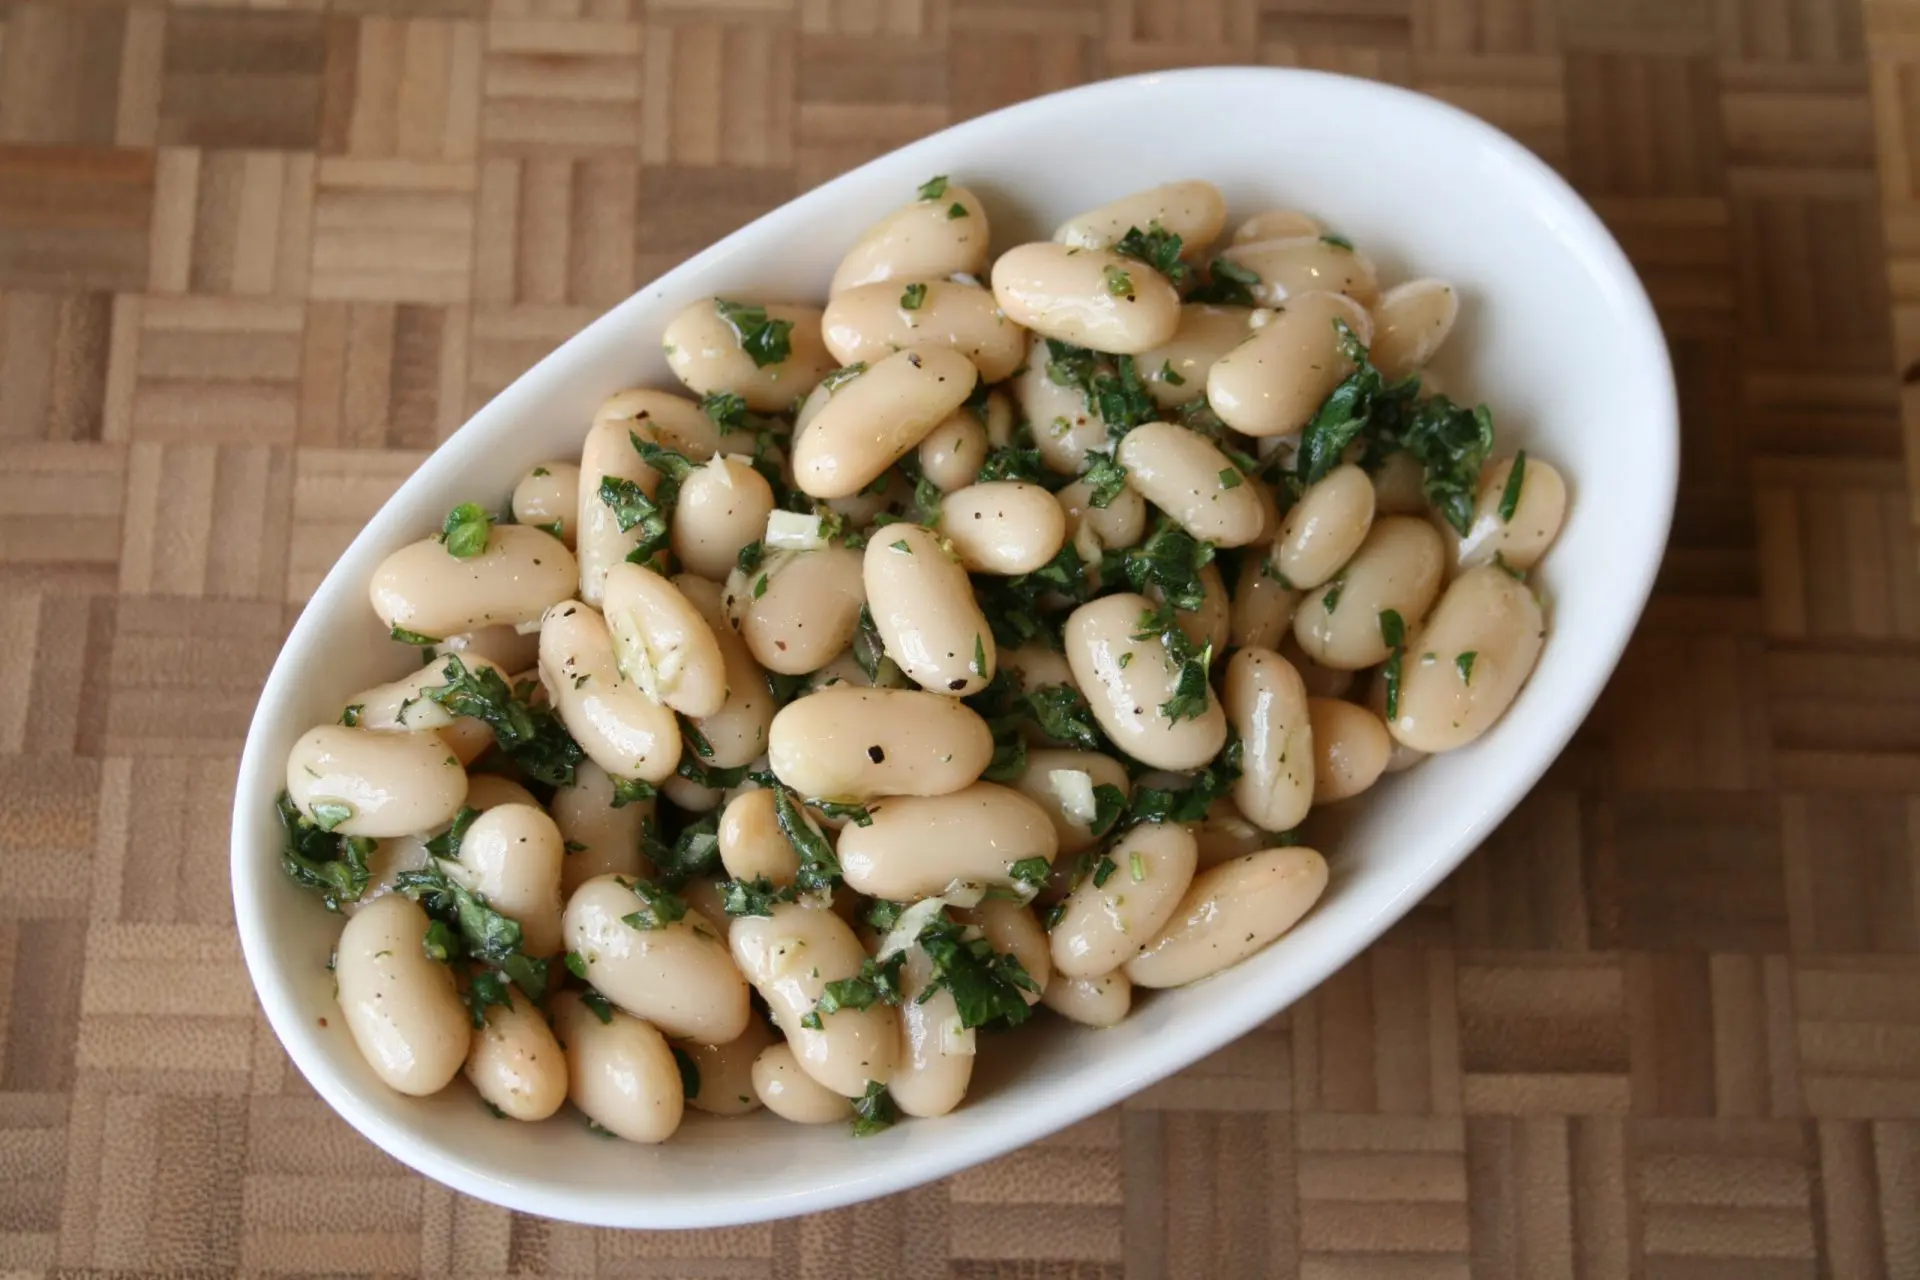 cannellini beans substitute, substitution for cannellini beans, substitute for cannellini beans, cannellini bean substitute, substitute cannellini beans, cannellini beans sub